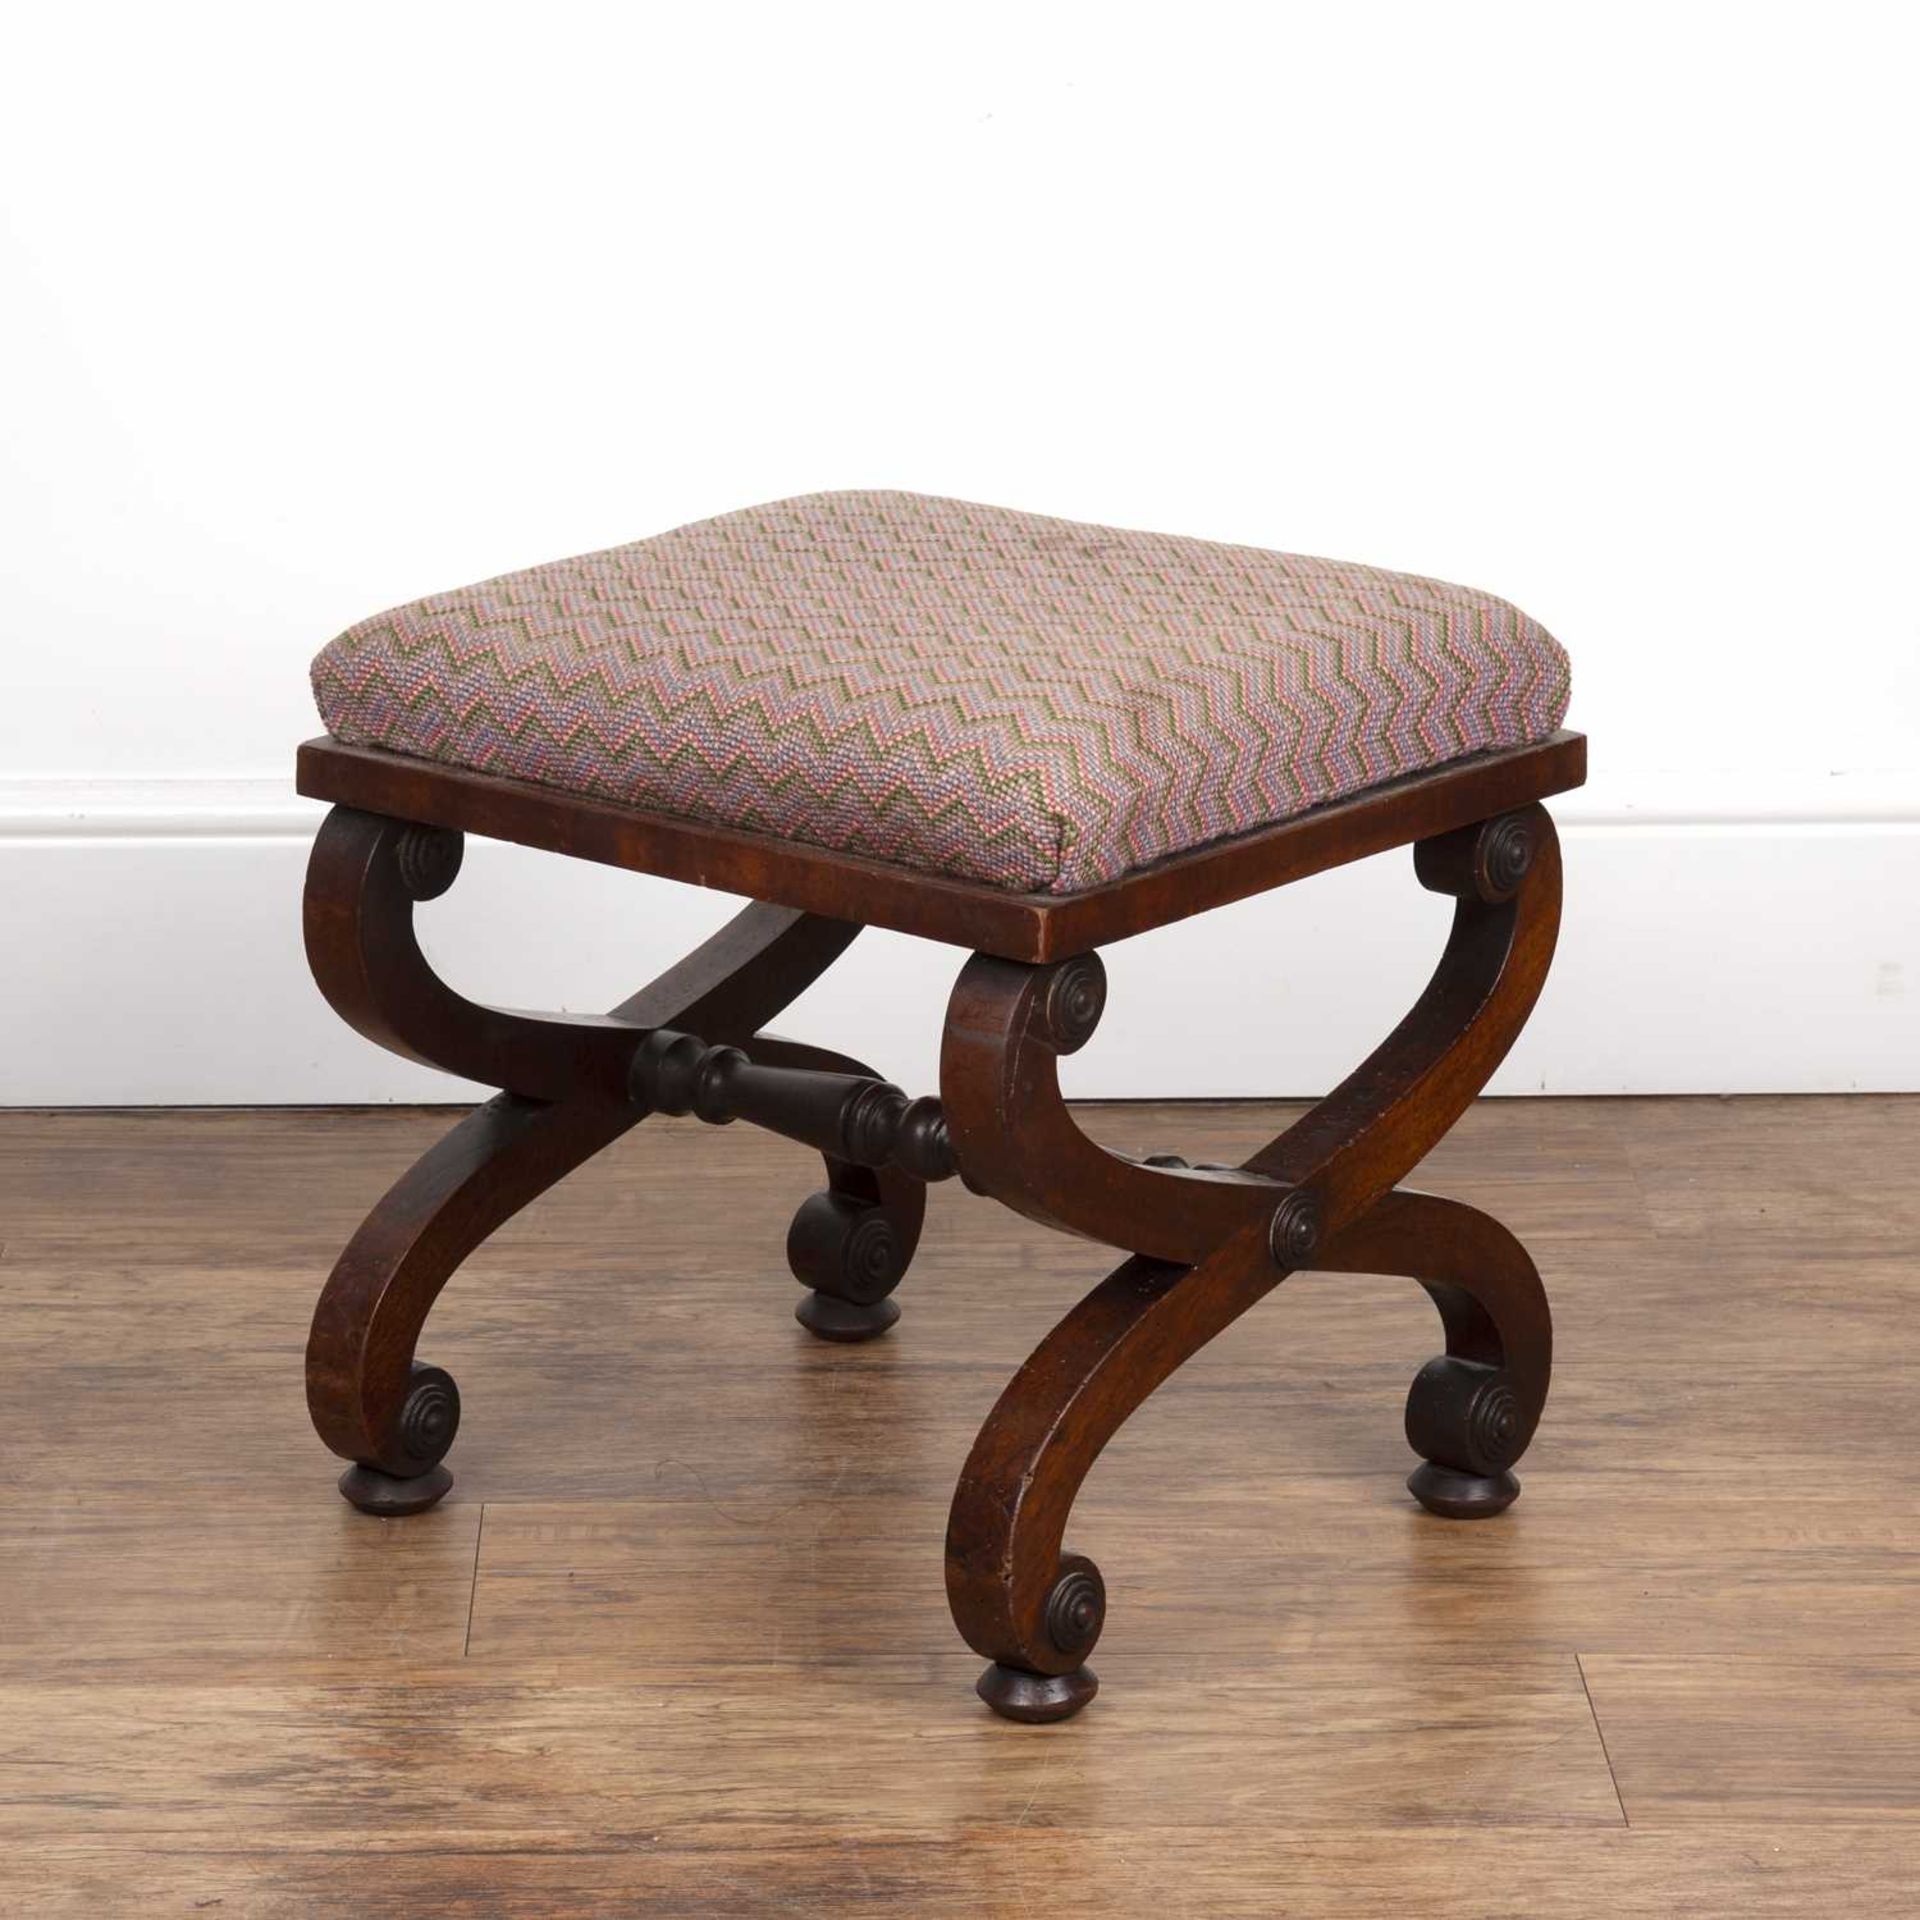 Mahogany 'X' frame stool 19th Century, with tapestry cover, 36cm x 40cm x 41cm highSome wear, marks, - Image 2 of 4